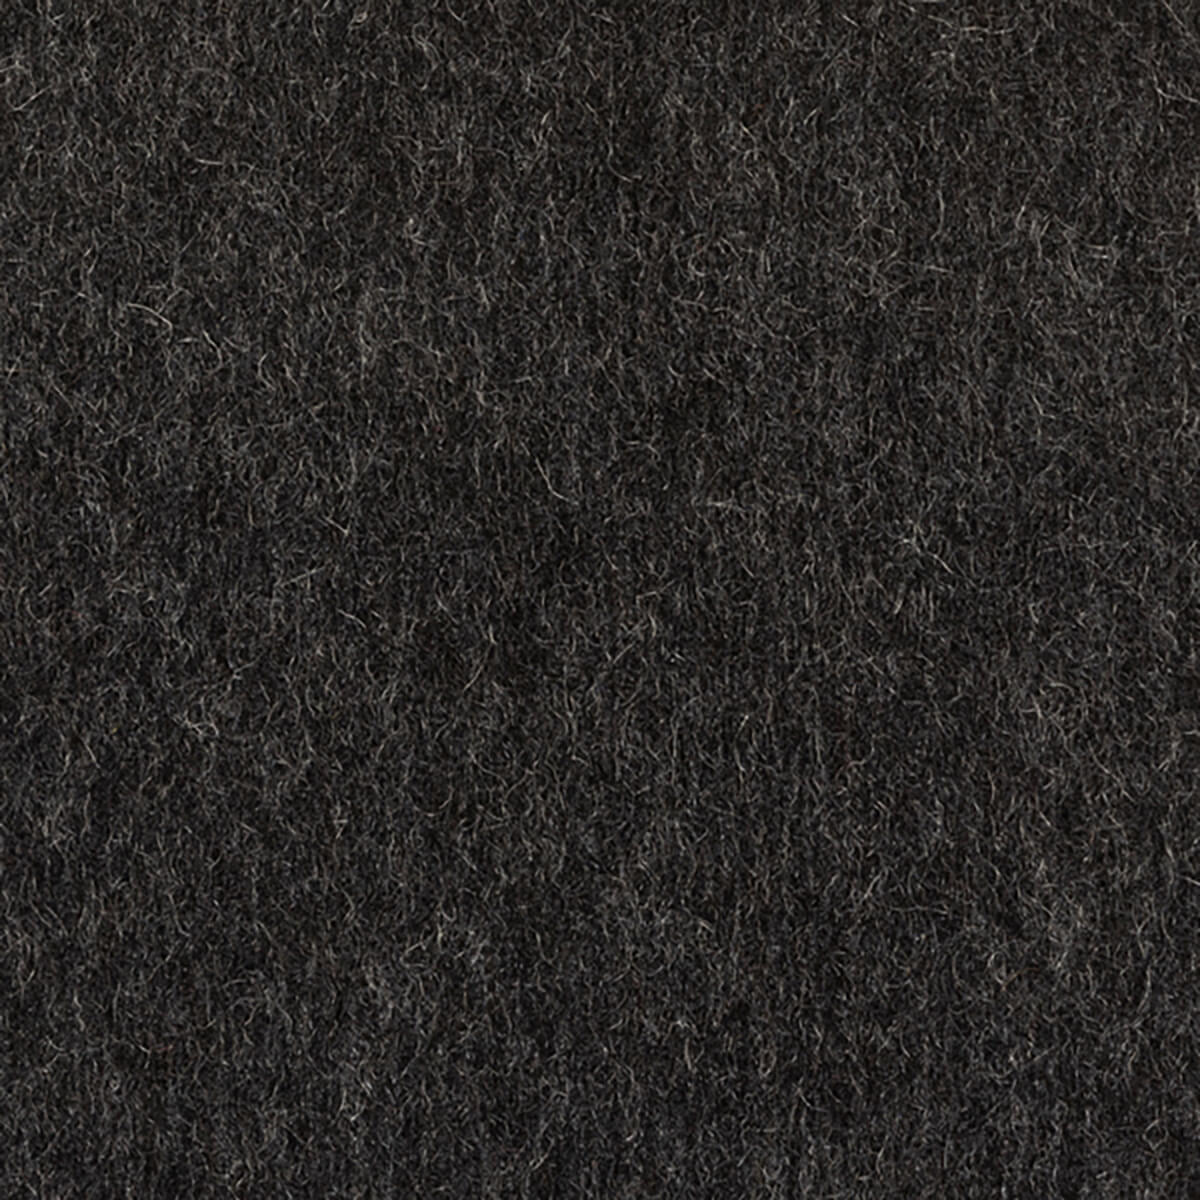 Swatch of Johnstons of Elgin’s Men's Crombie Cashmere Coat in Charcoal on a white background TA000516RU6081